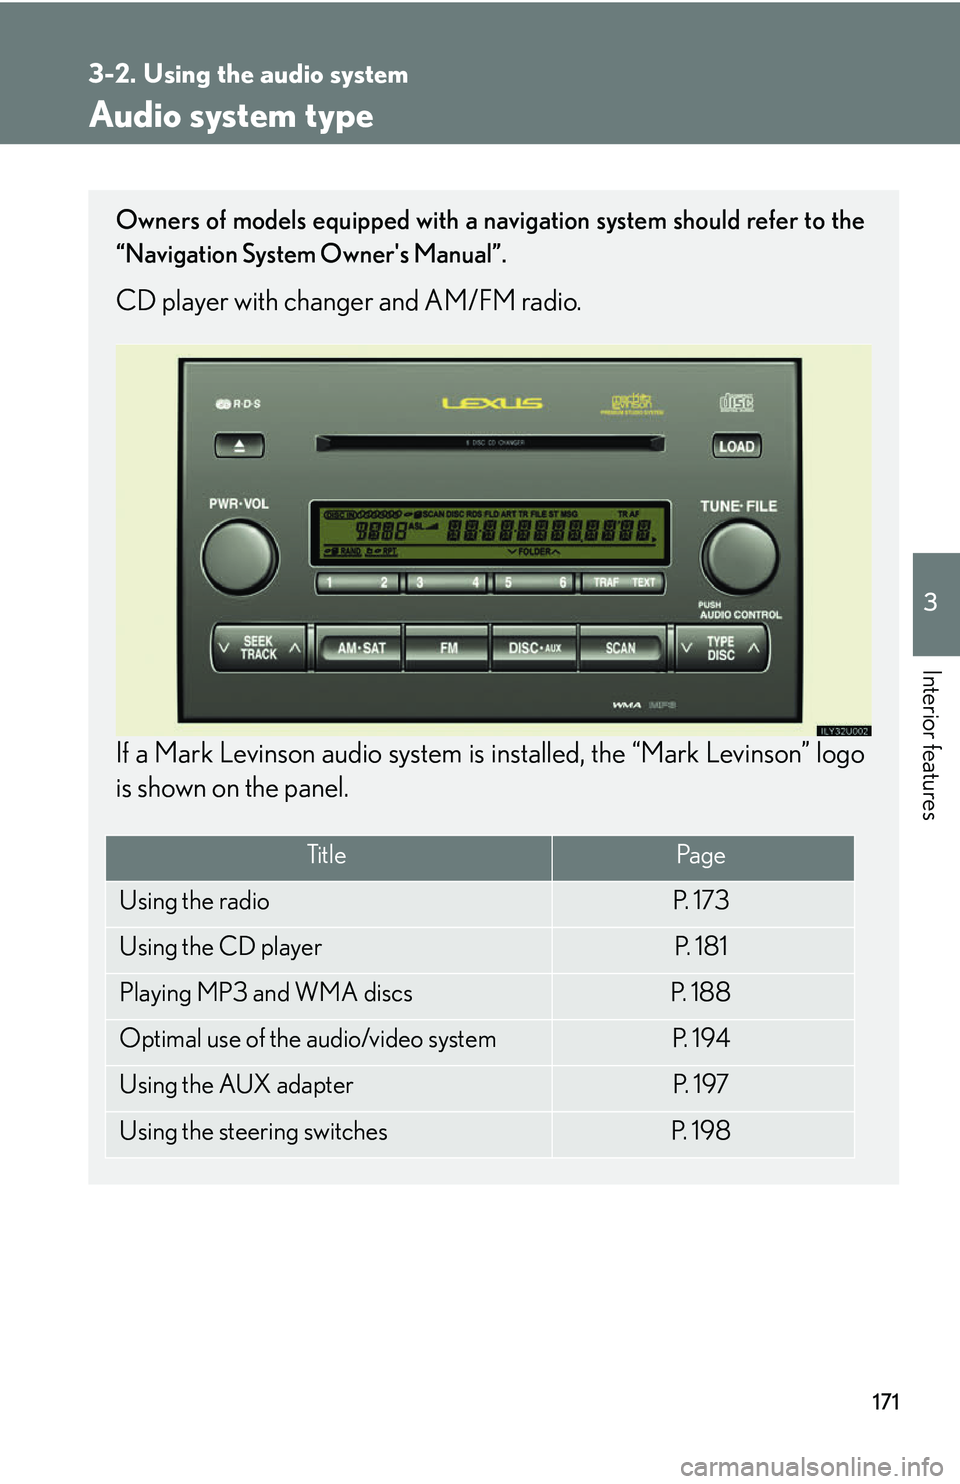 Lexus GX470 2007  Audio/Video System / LEXUS 2007 GX470 OWNERS MANUAL (OM60C64U) 171
3
Interior features
3-2. Using the audio system
Audio system type
Owners of models equipped with a navigation system should refer to the
“Navigation System Owners Manual”.
CD player with chan